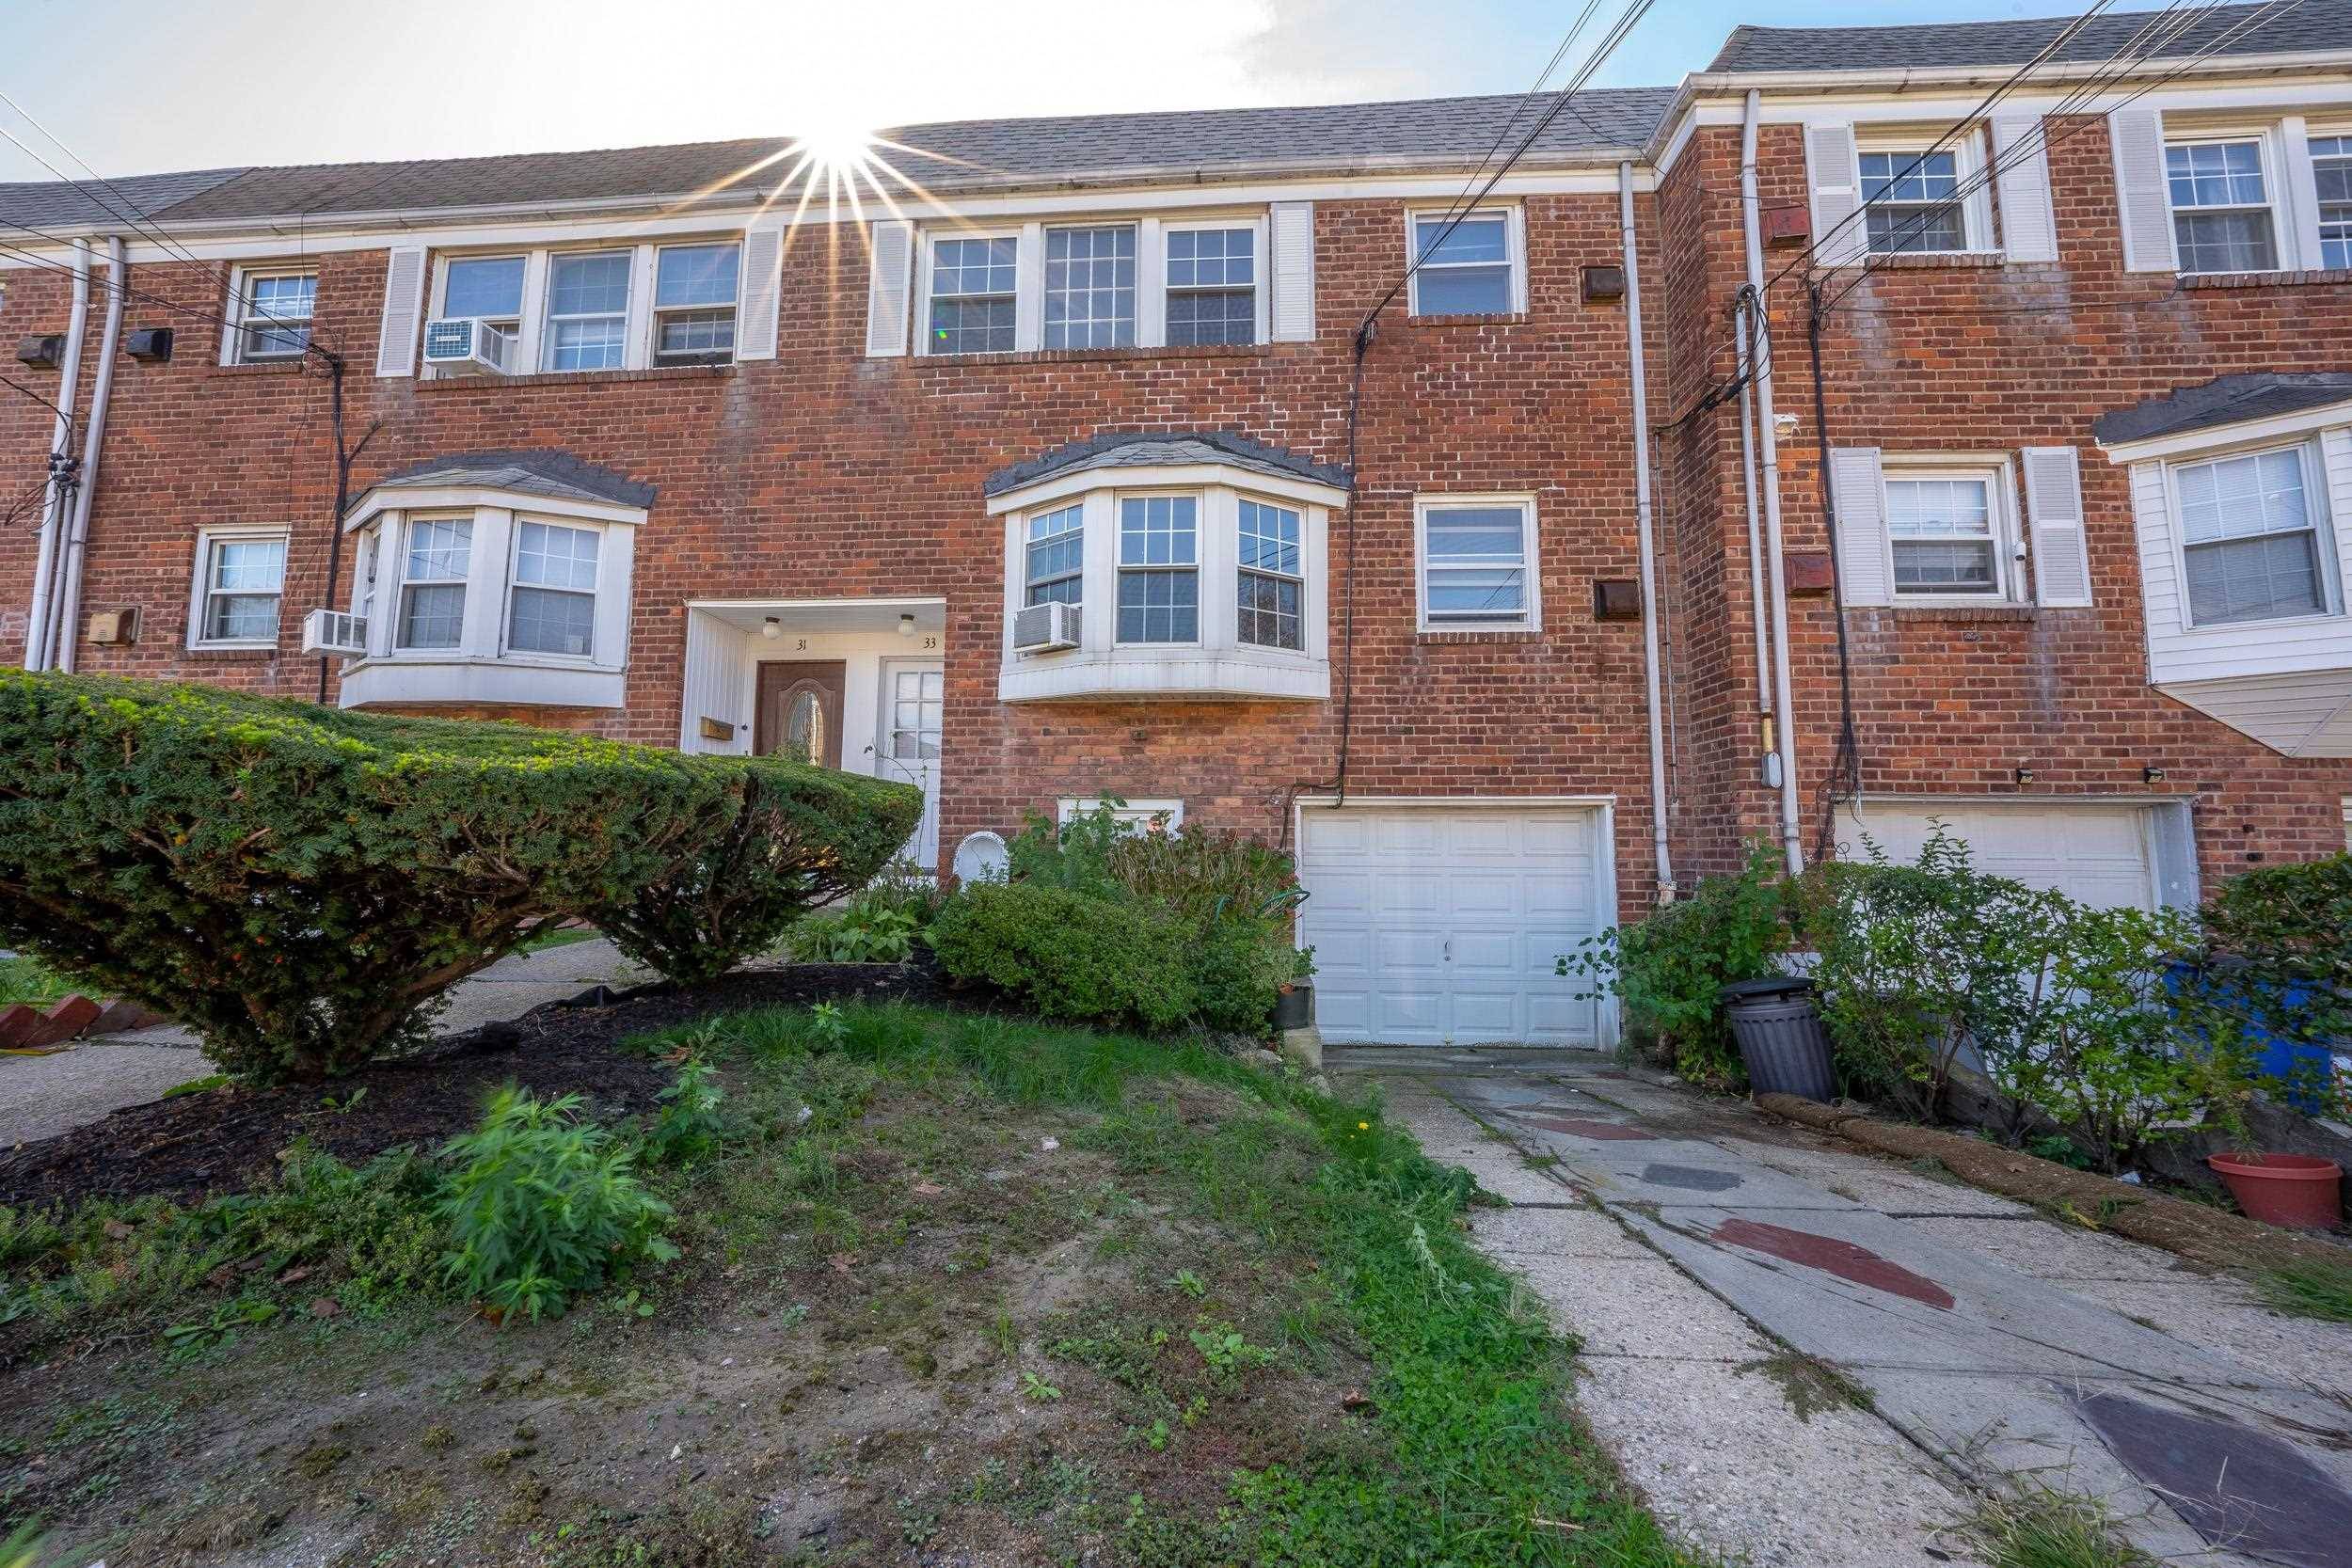 33 EXETER RD Multi-Family New Jersey